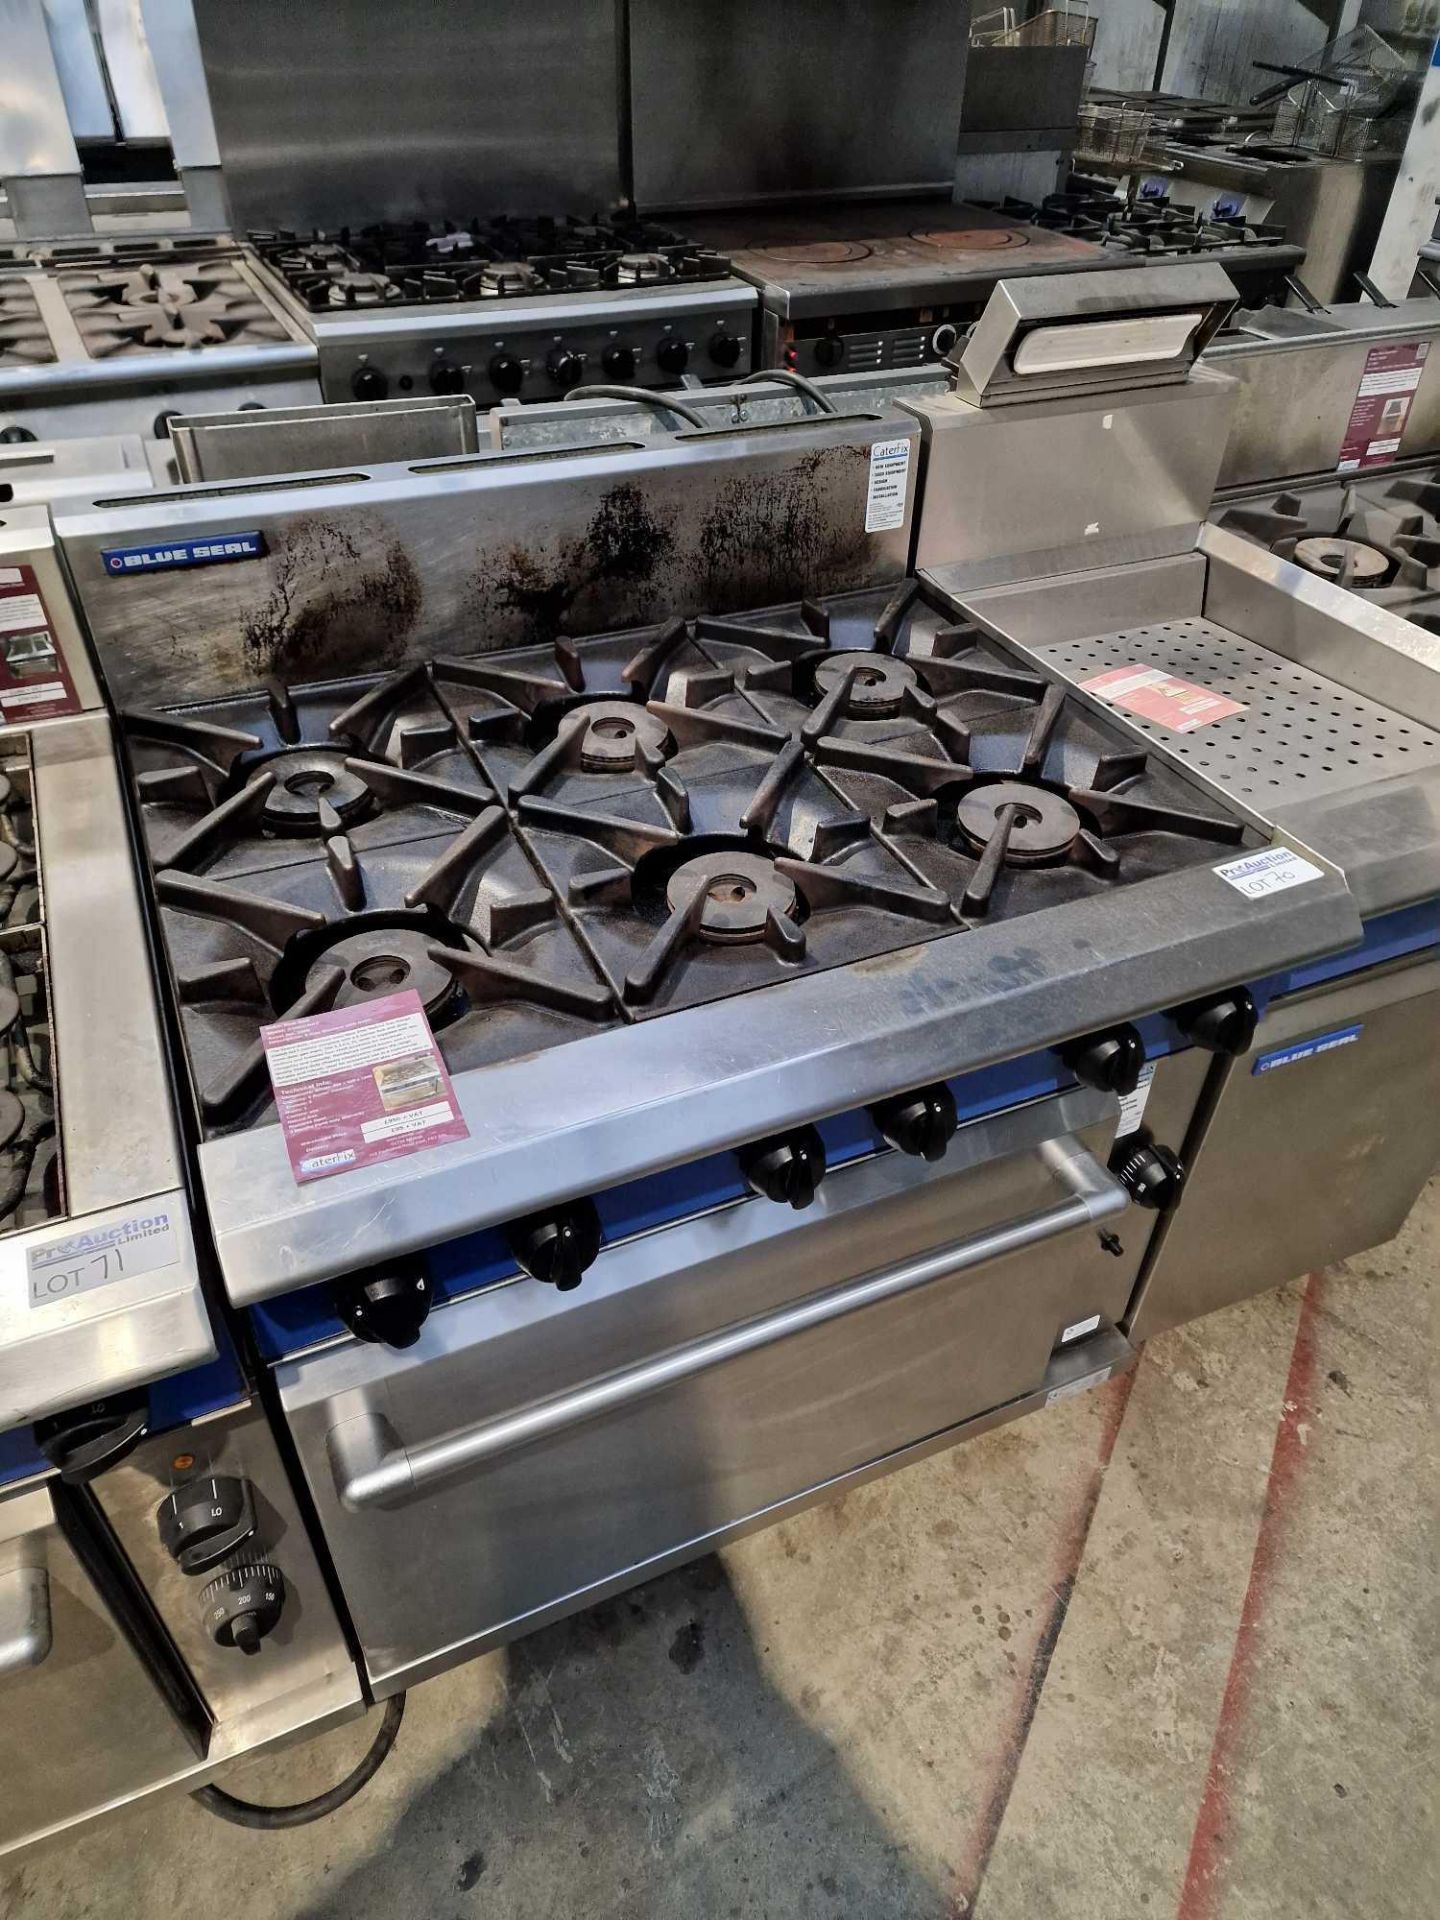 Blue Seal Stainless Steel 6 Gas Burners with oven - The heavy duty, stainless steel Blue Seal - Image 4 of 4